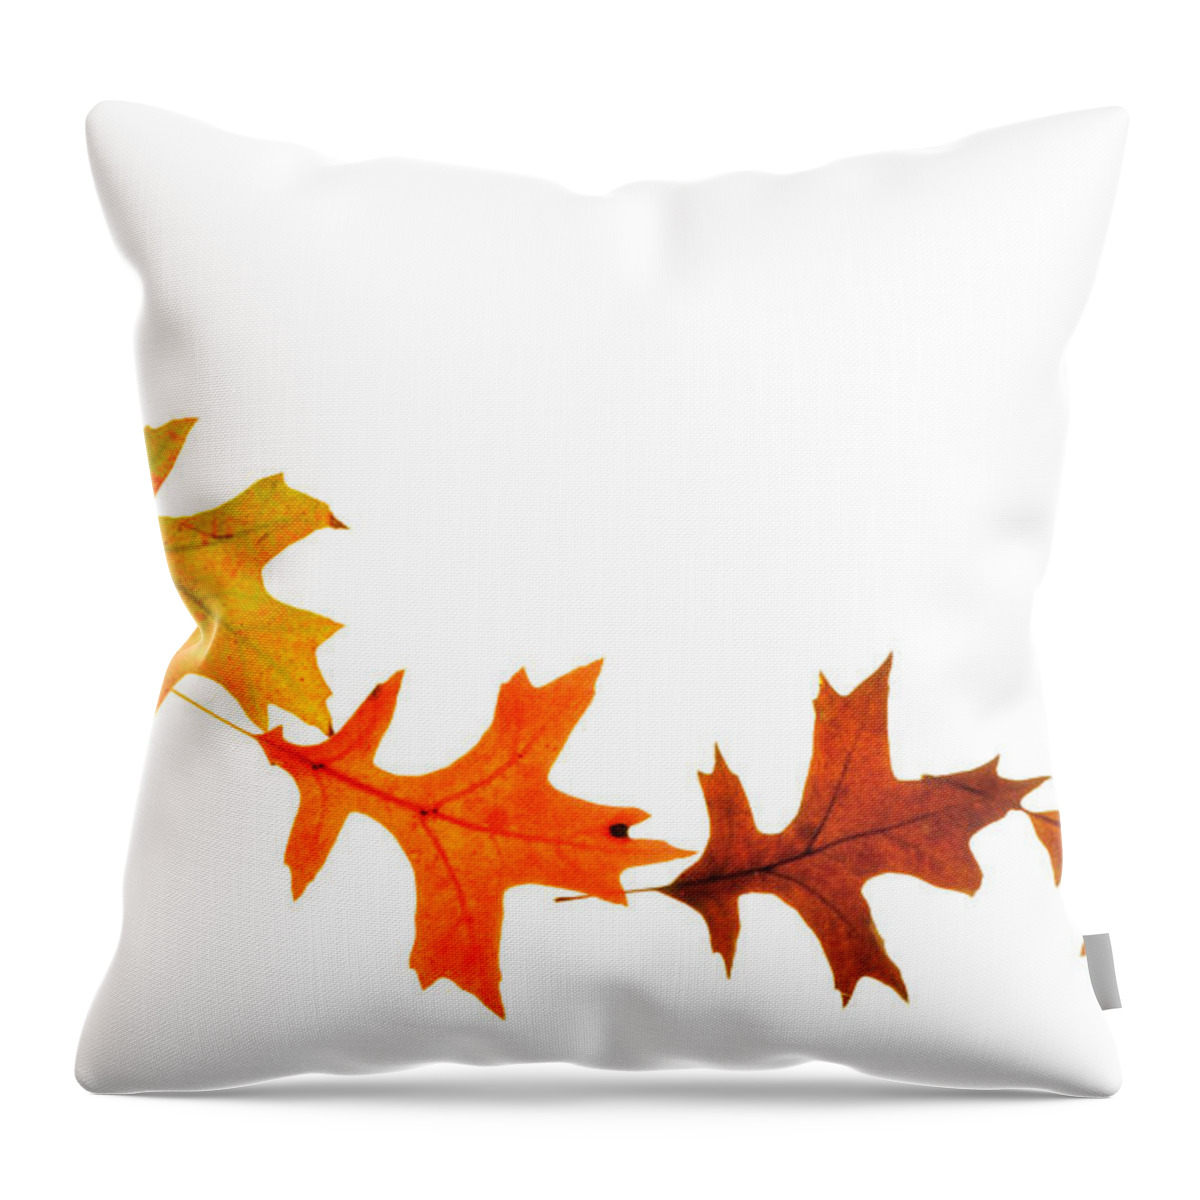 Leaves Throw Pillow featuring the photograph Autumn Leaves 1 by Mark Fuller